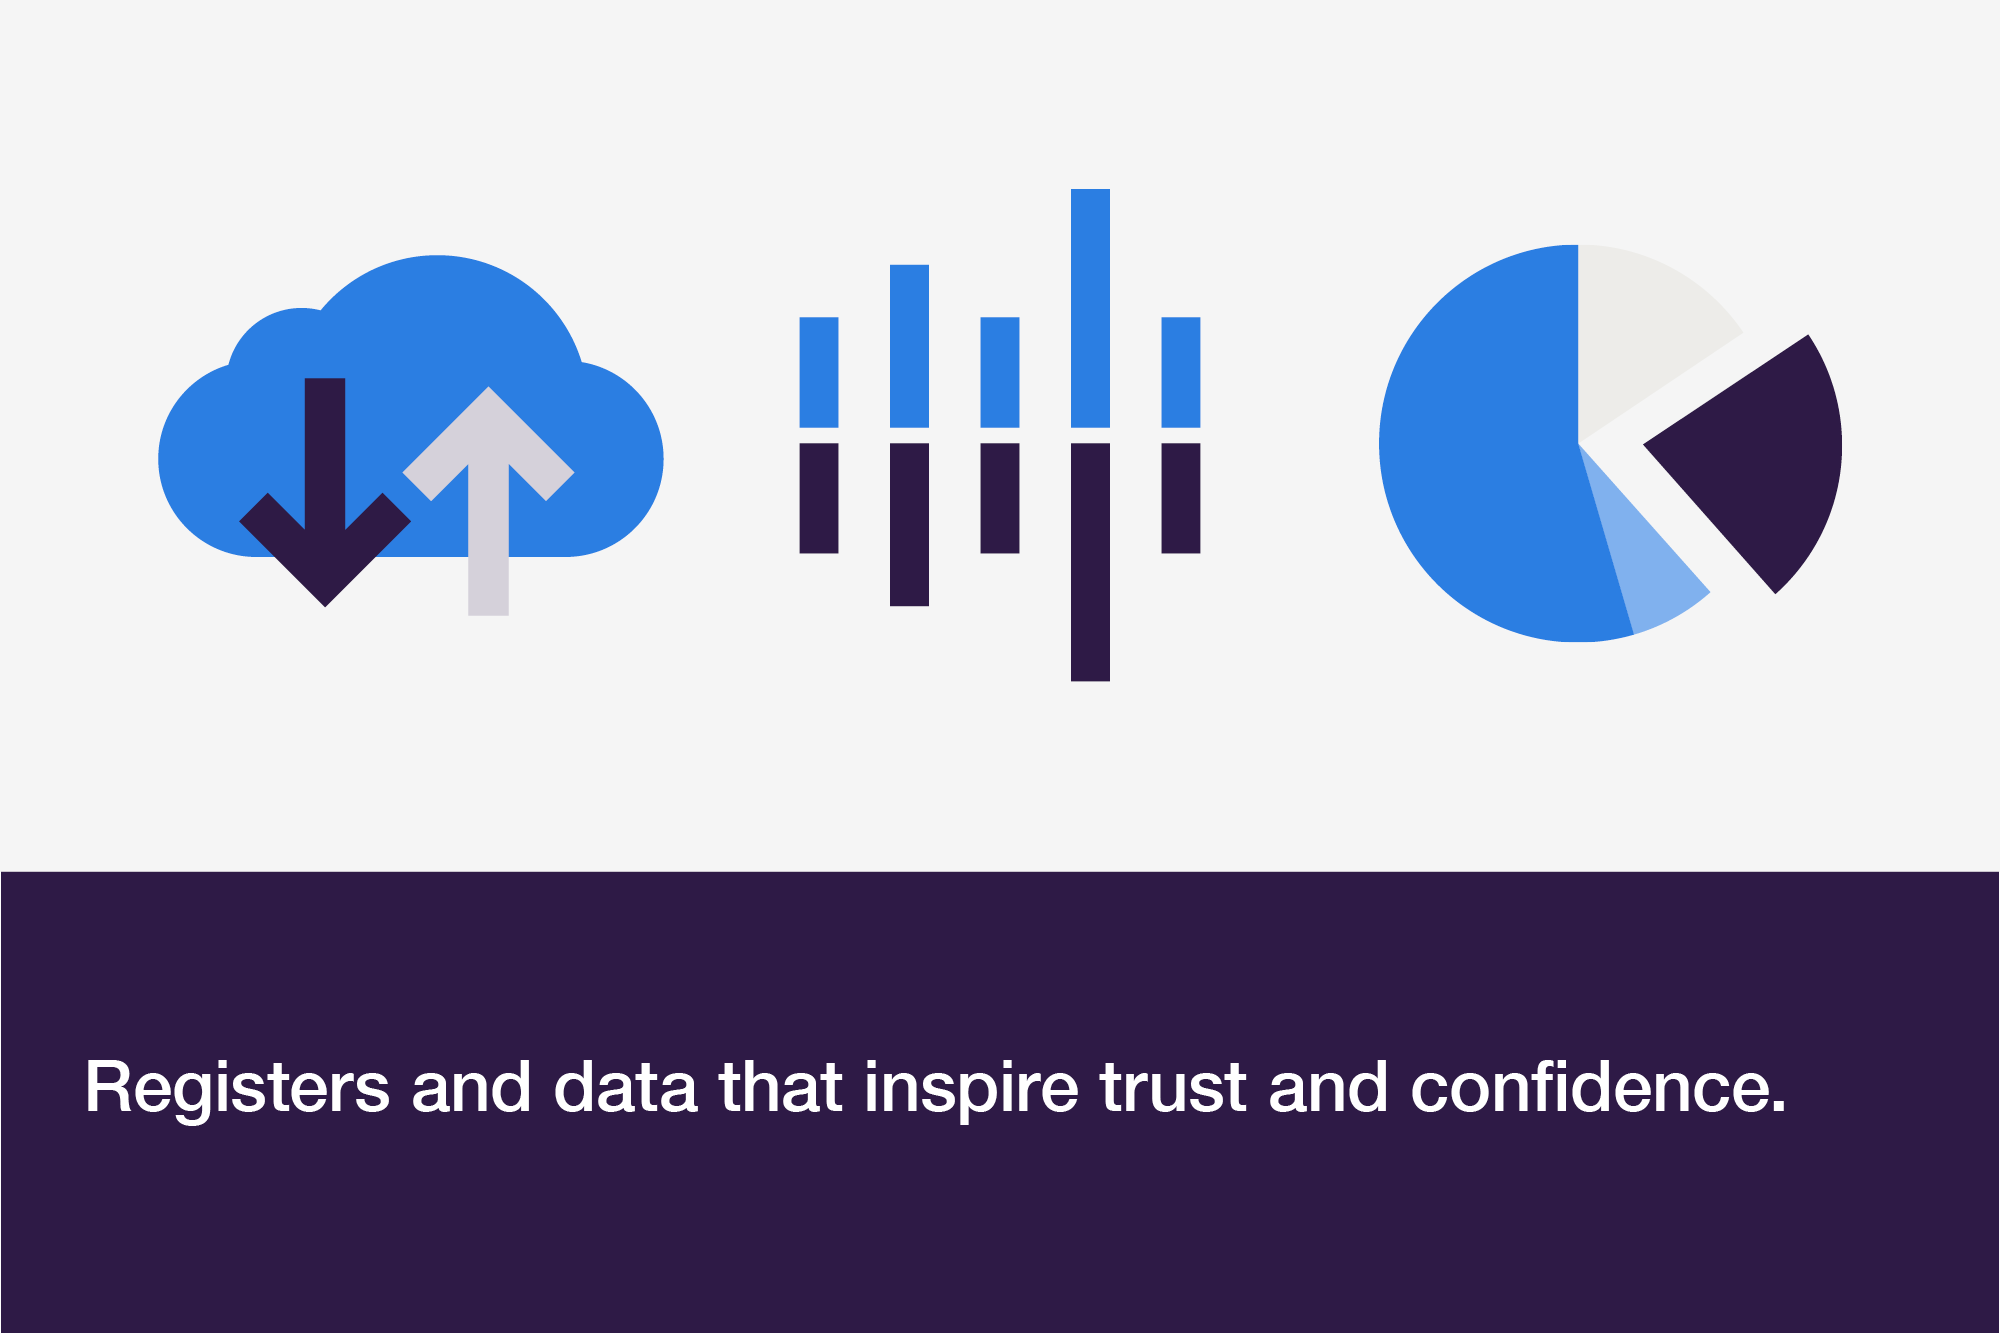 Registers and data that inspire trust and confidence.